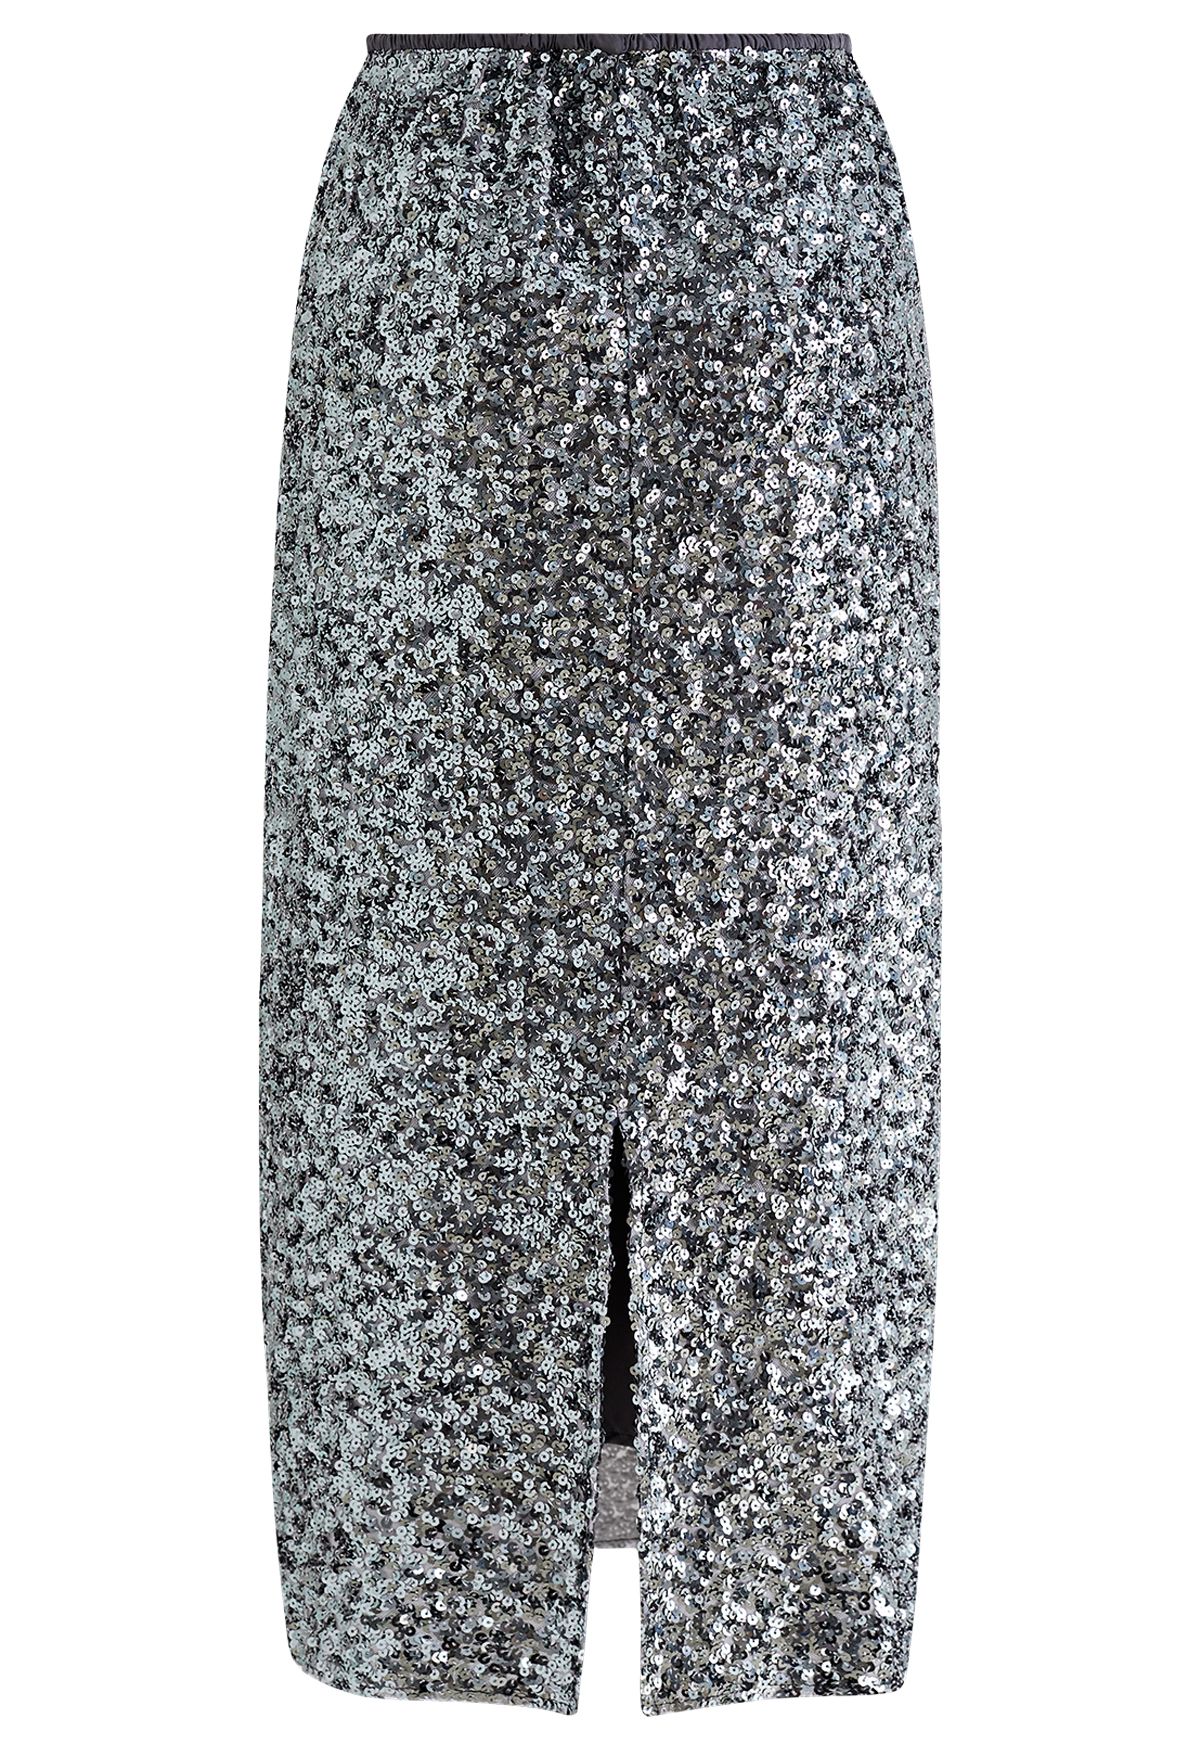 Iridescent Sequin Embellished Pencil Skirt in Silver